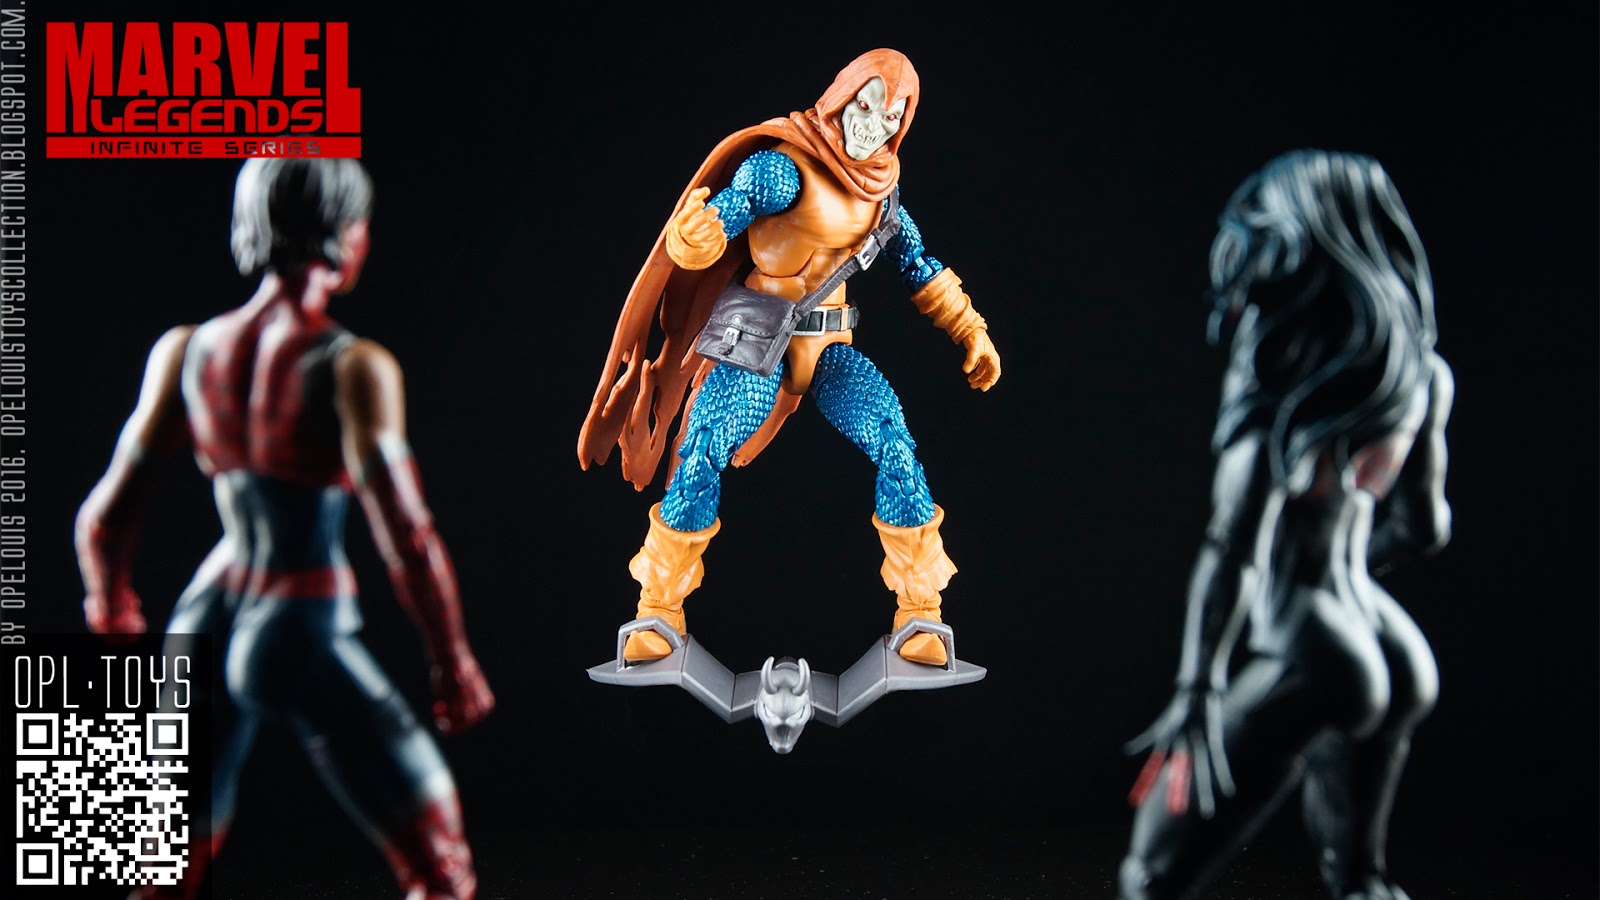 Opelouis's Toys Collection: Marvel Legends Spider-Man, Spider-B*tch and